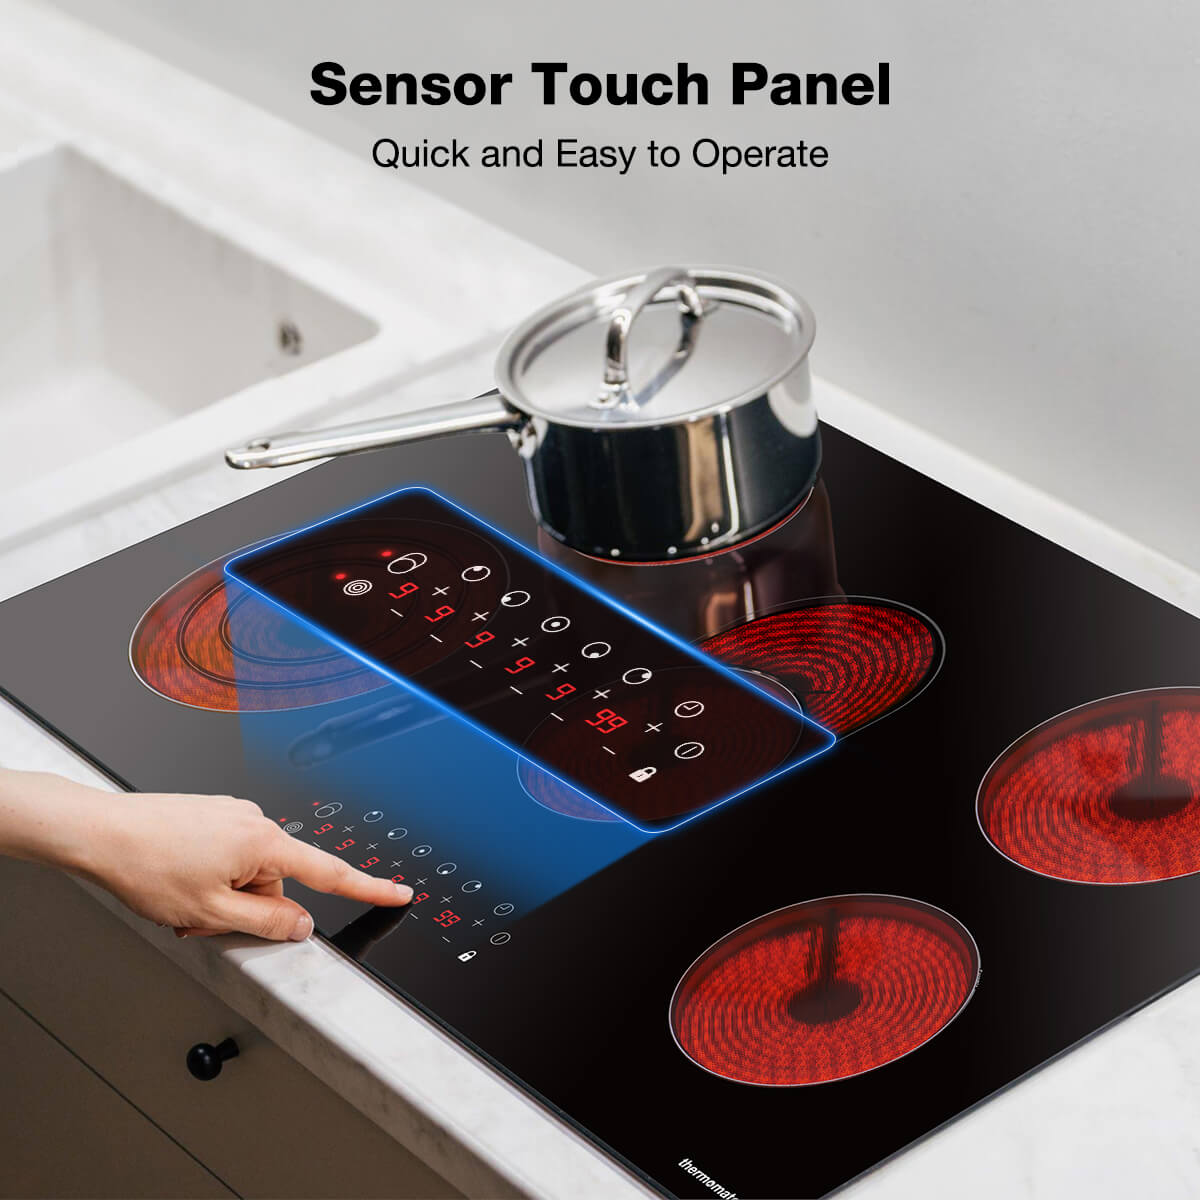 Sensor Touch Panel | Thermomate